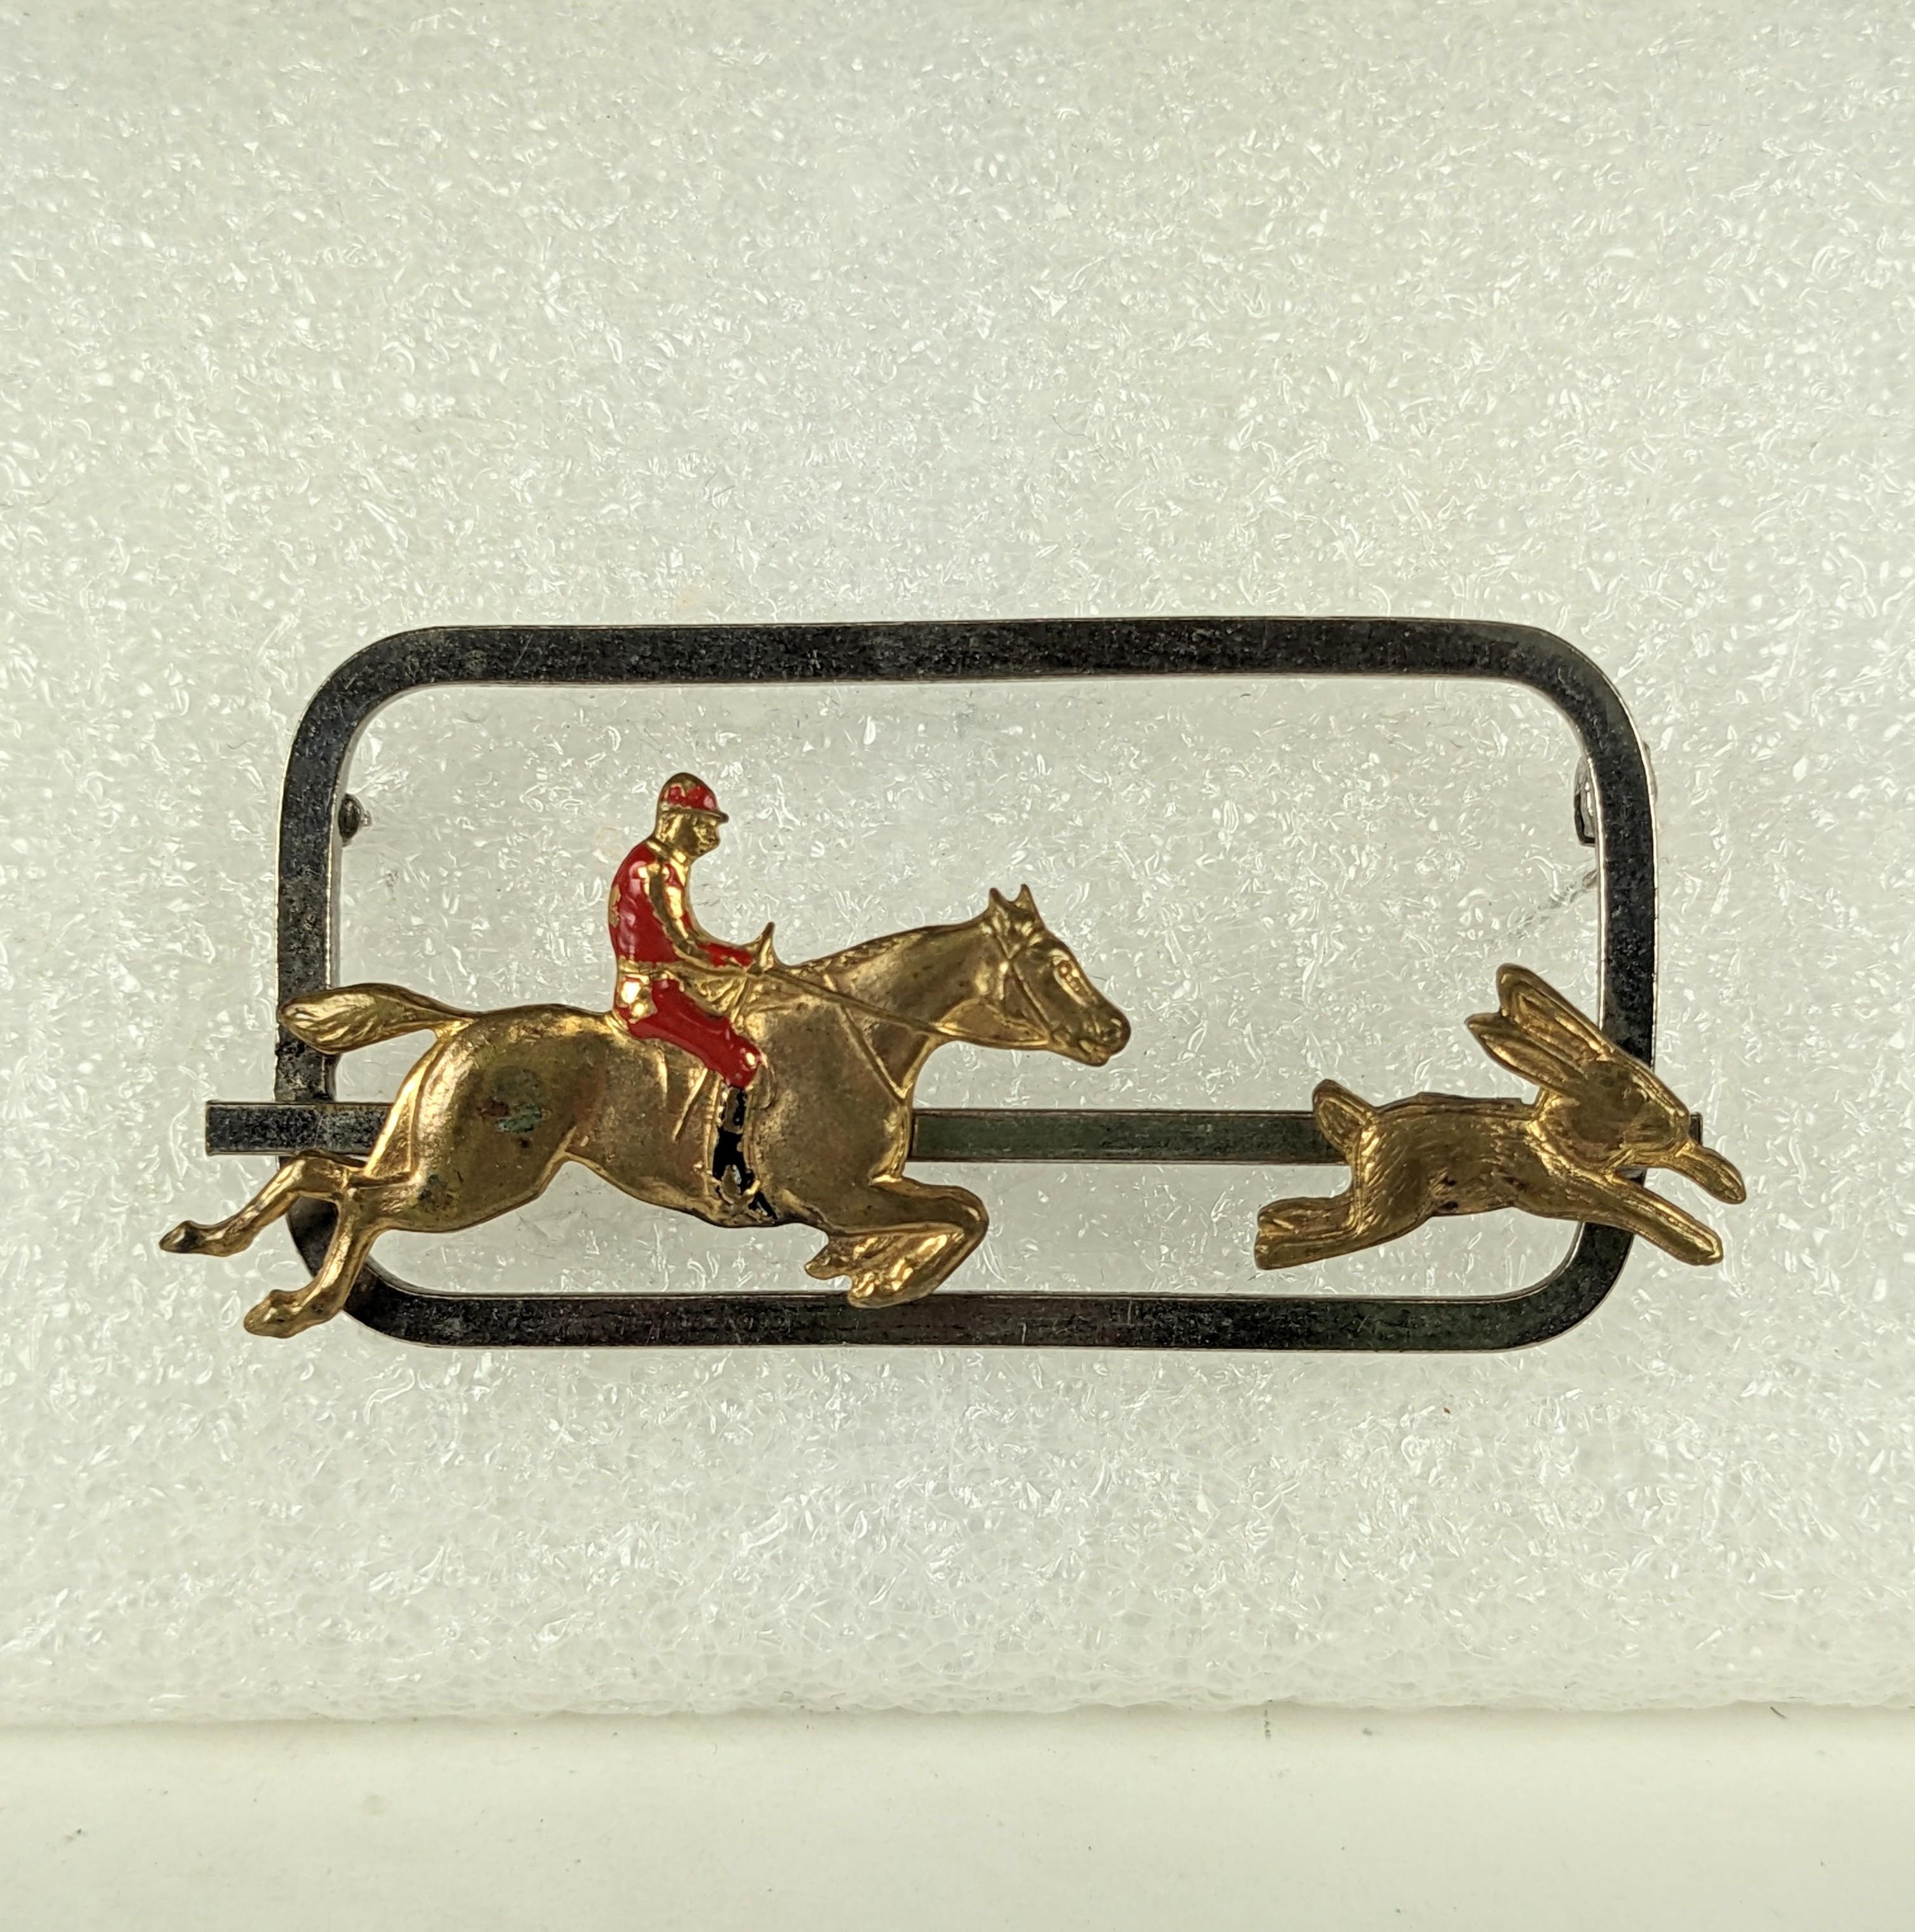 Charming Art Deco Mechanical Hunting Brooch from the 1920's. Rider and bunny slide on a track so brooch can be worn with different positions. Chrome and gilt metal with enamel. Unusual design. 
2.5